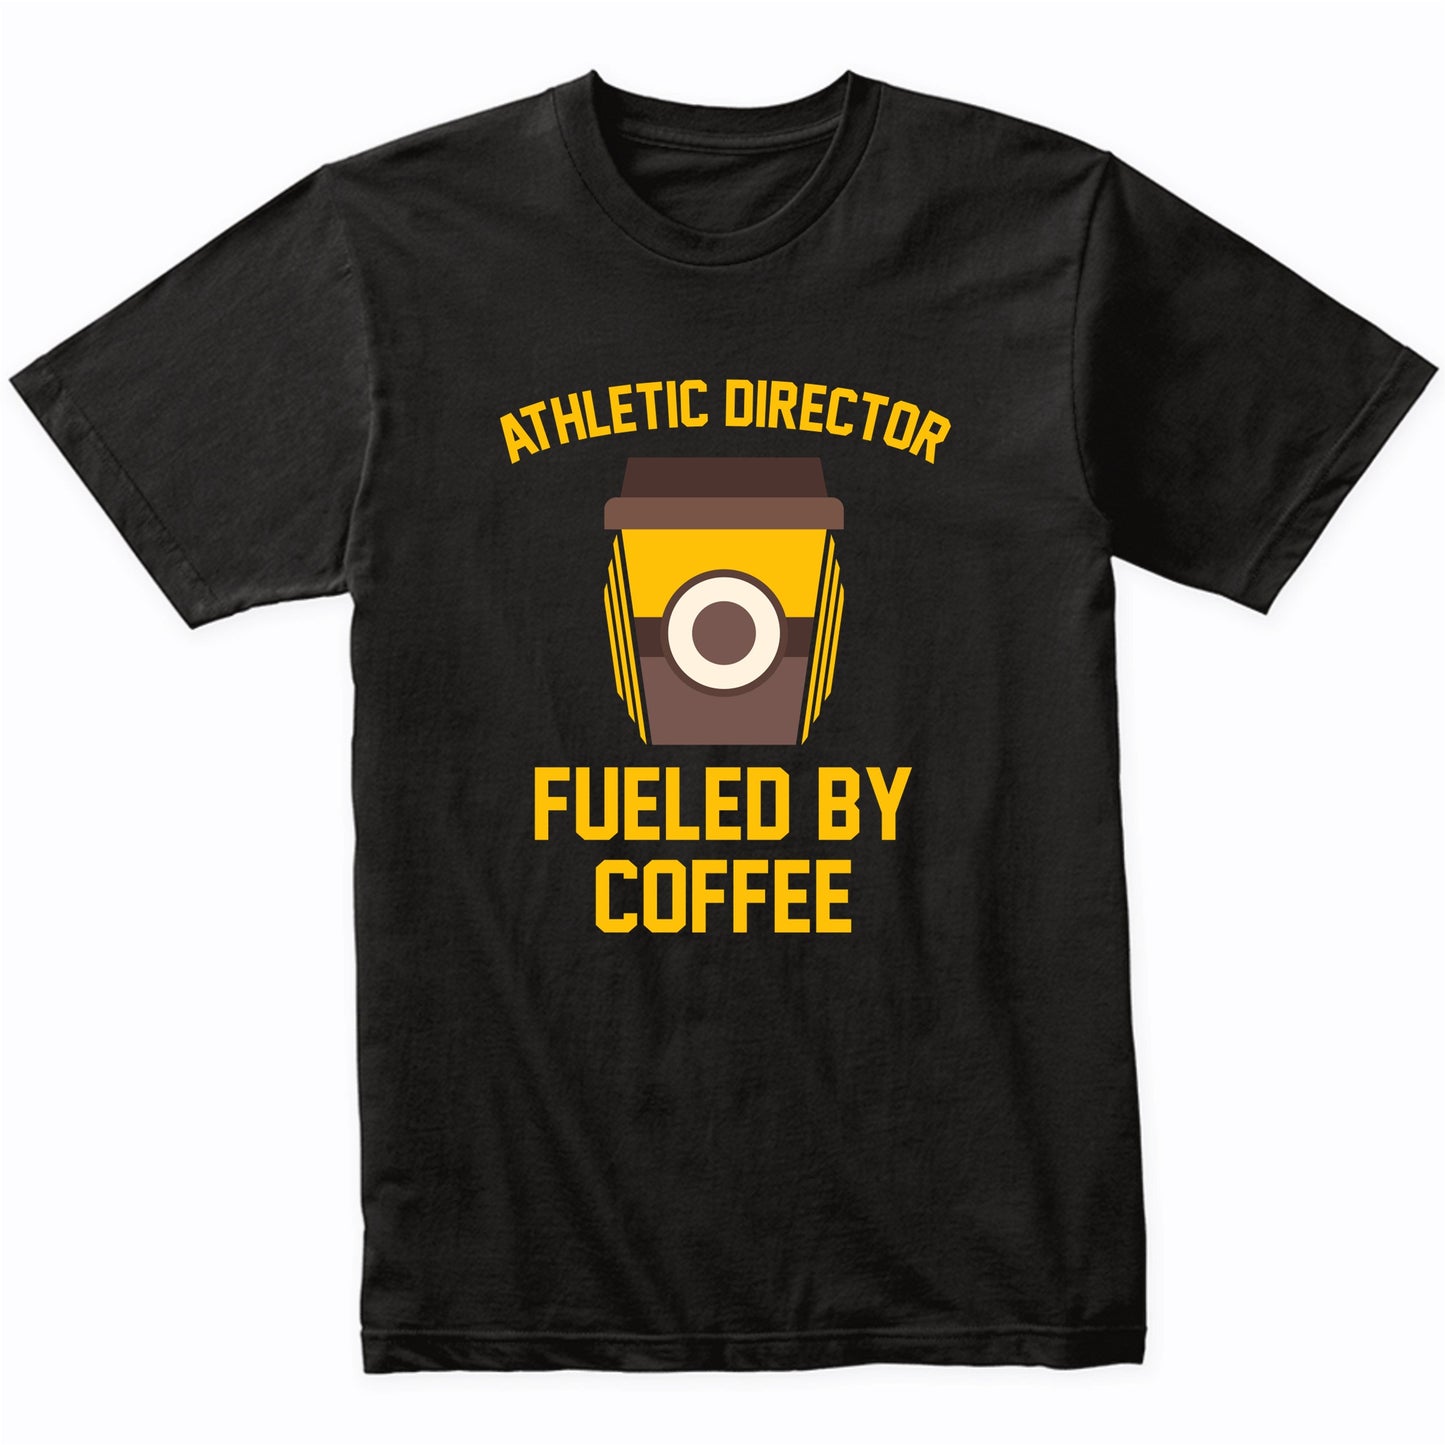 Athletic Director Fueled By Coffee Funny Shirt